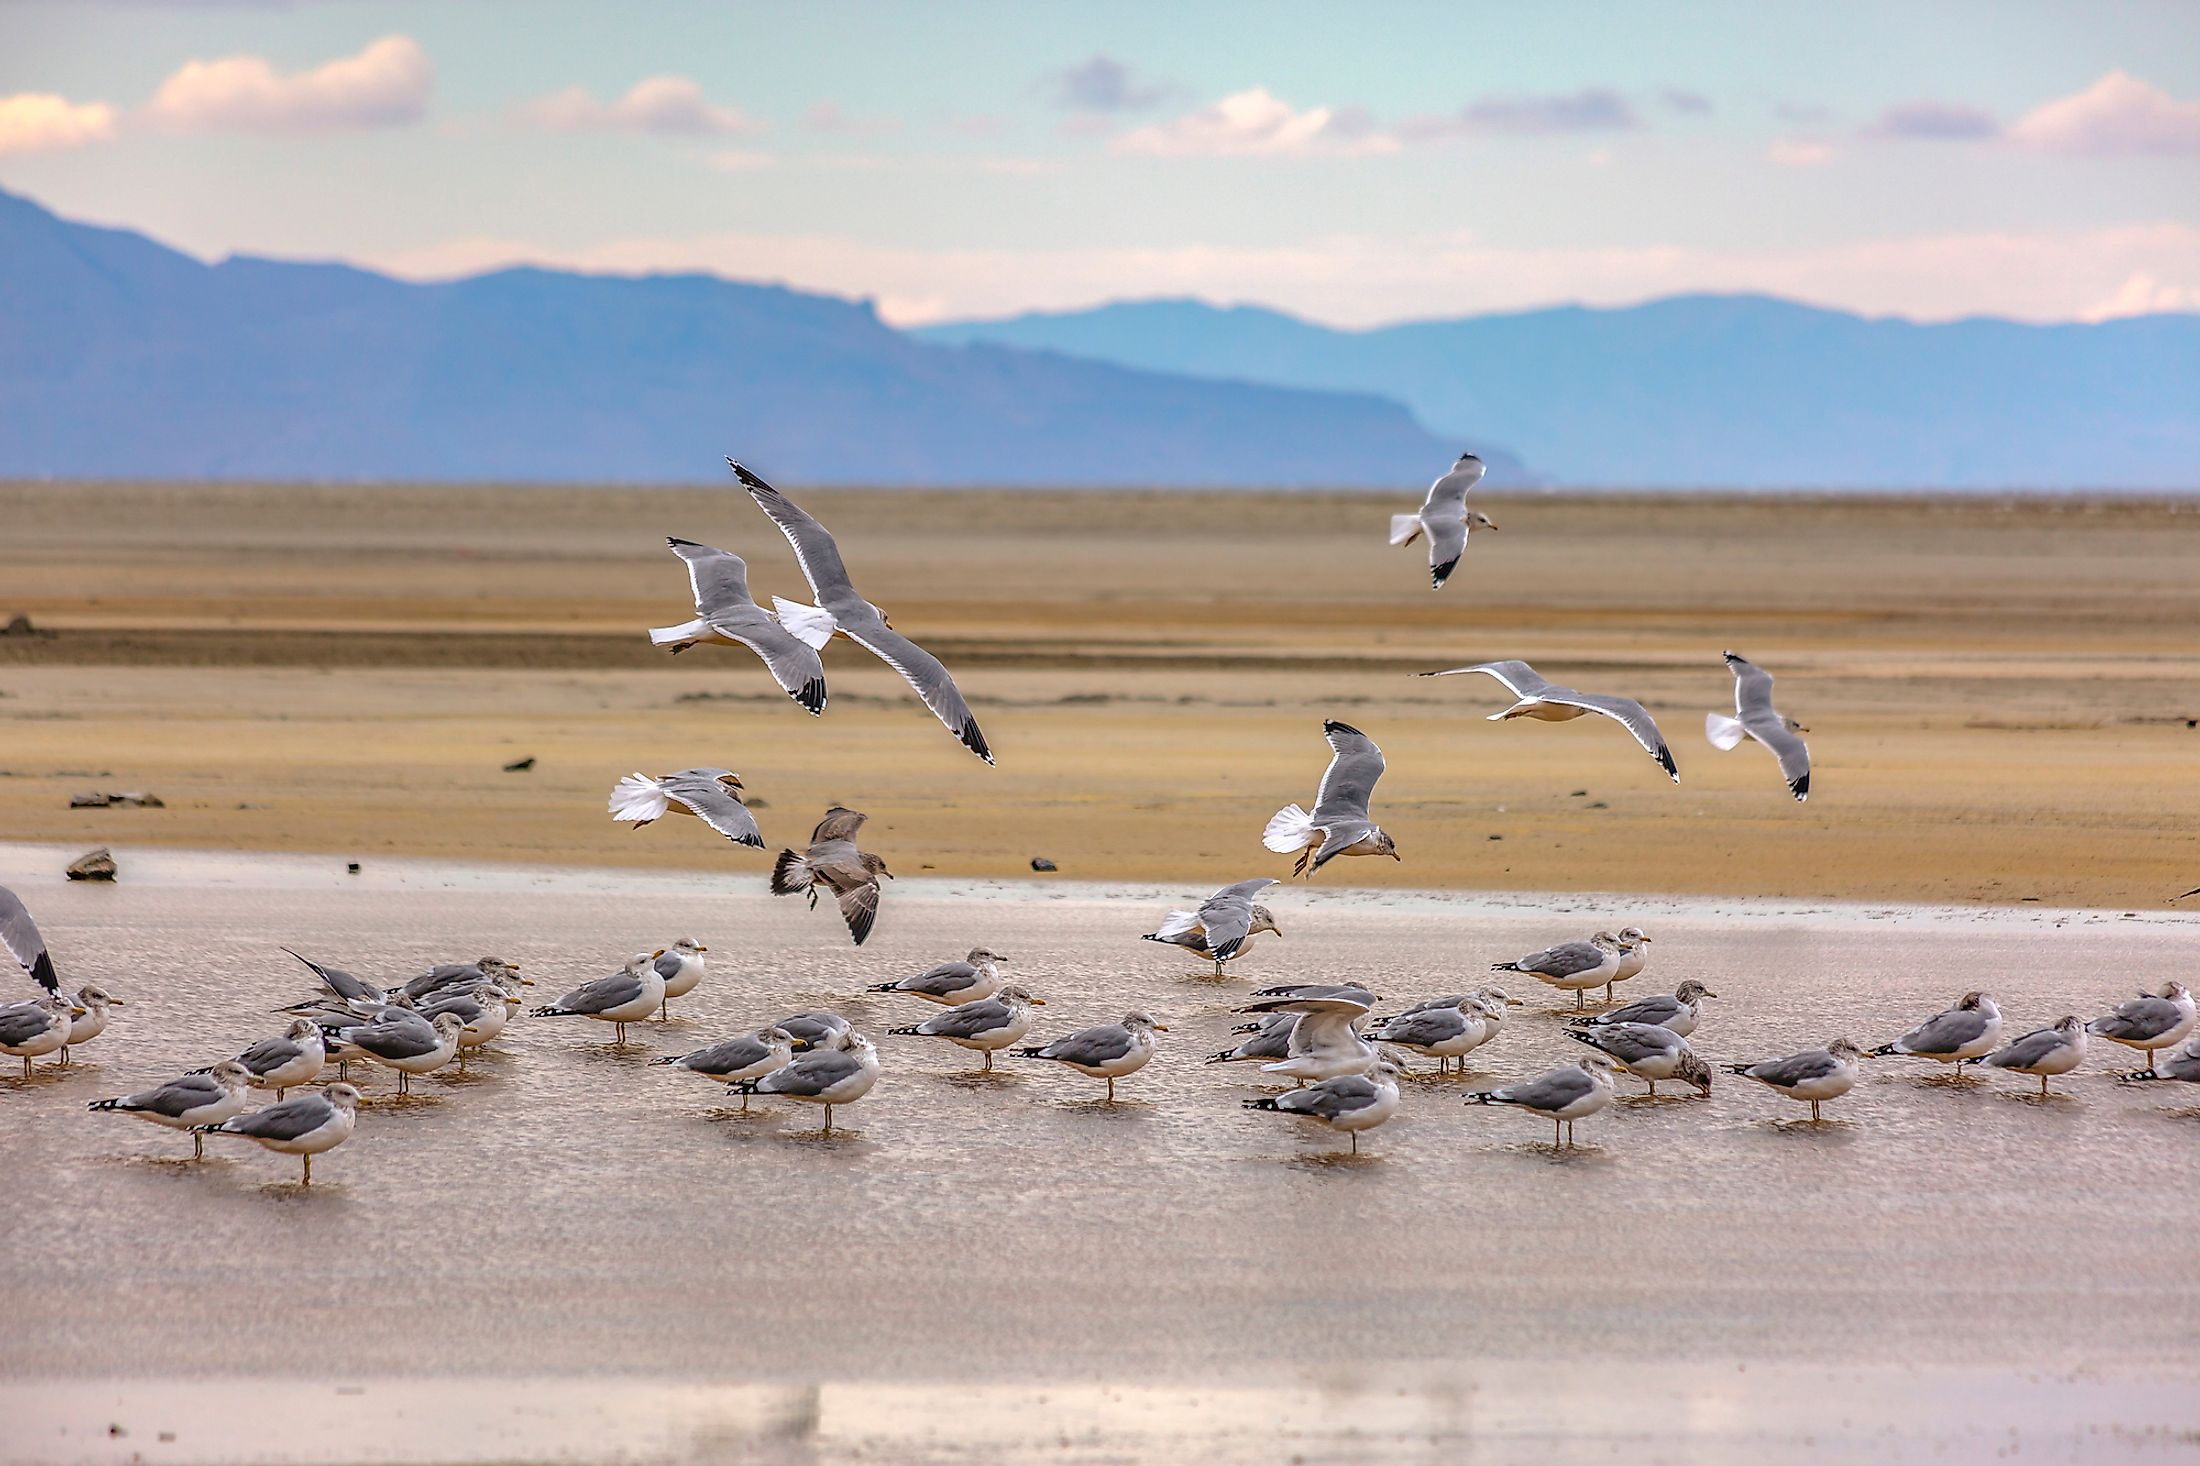 The Great Salt Lake in Utah with a flock of birds.